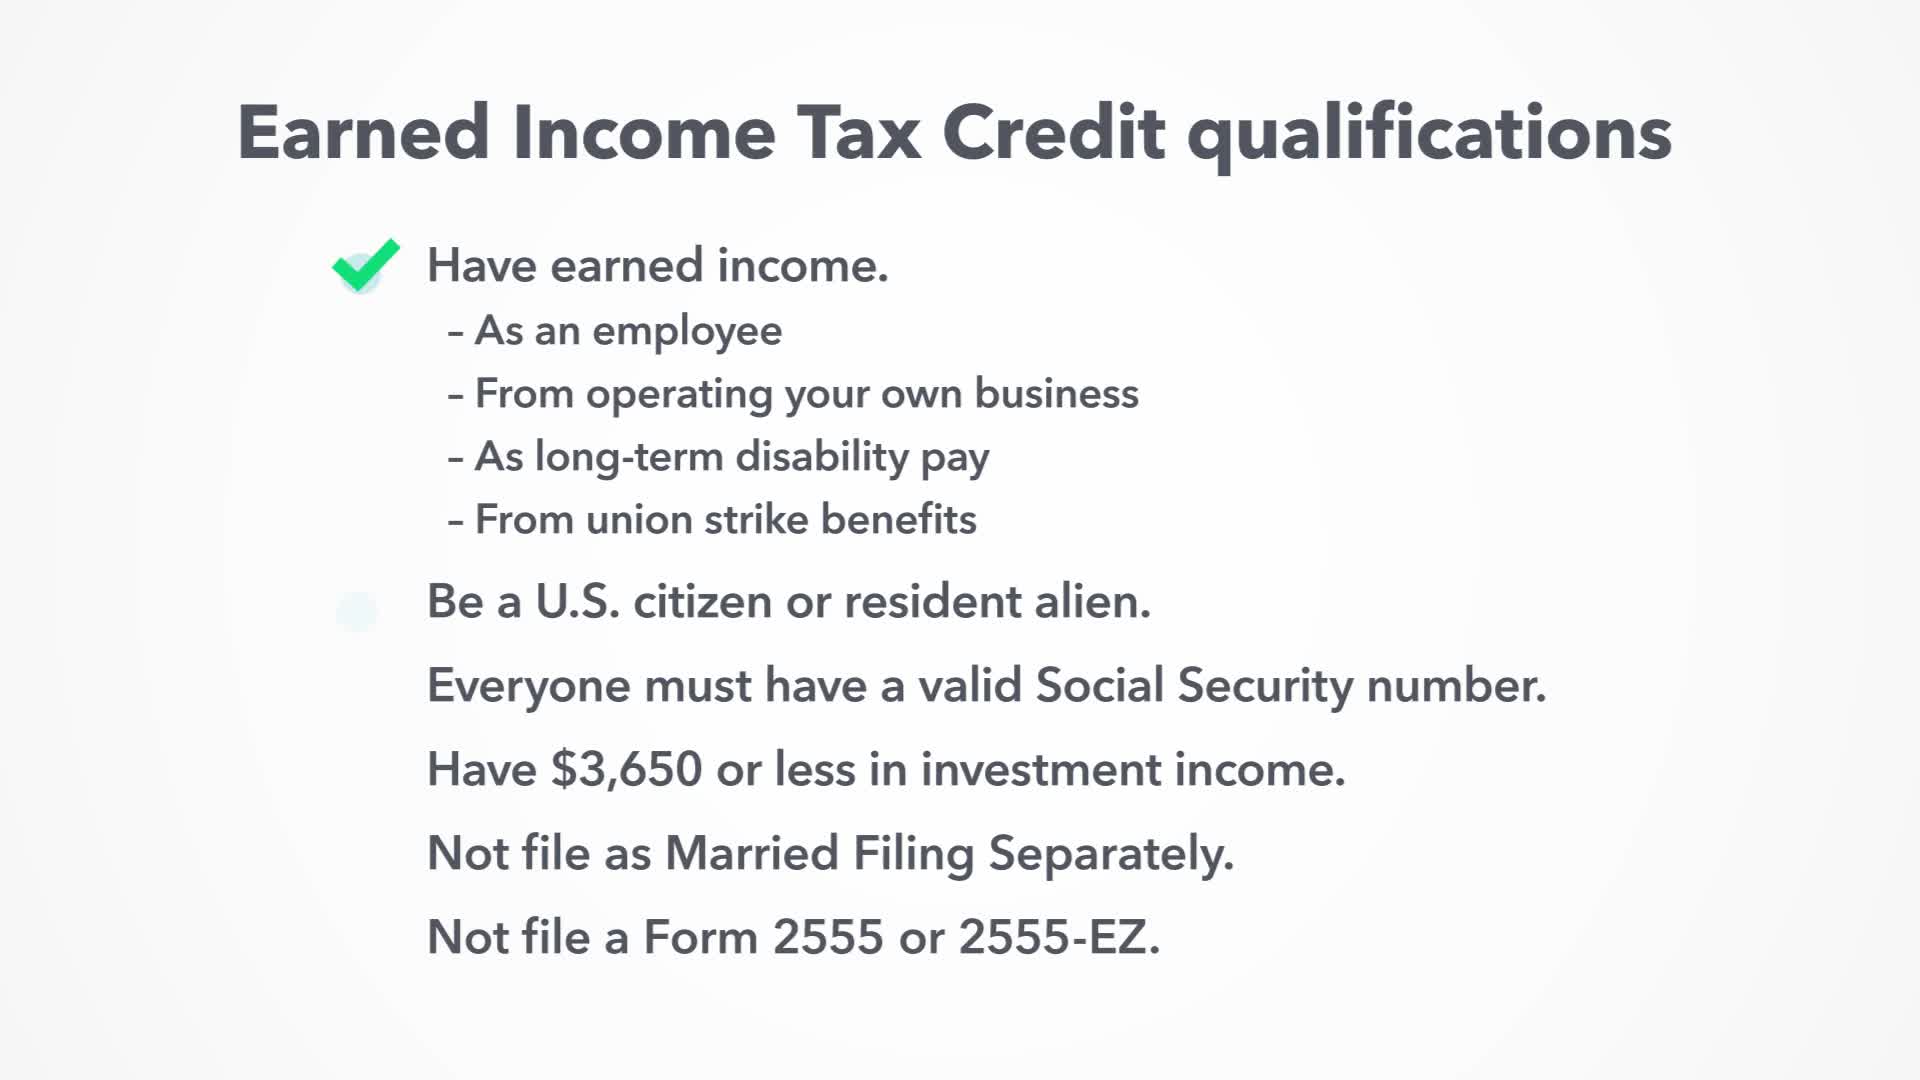 Who Qualifies for the Earned Tax Credit? [Video]